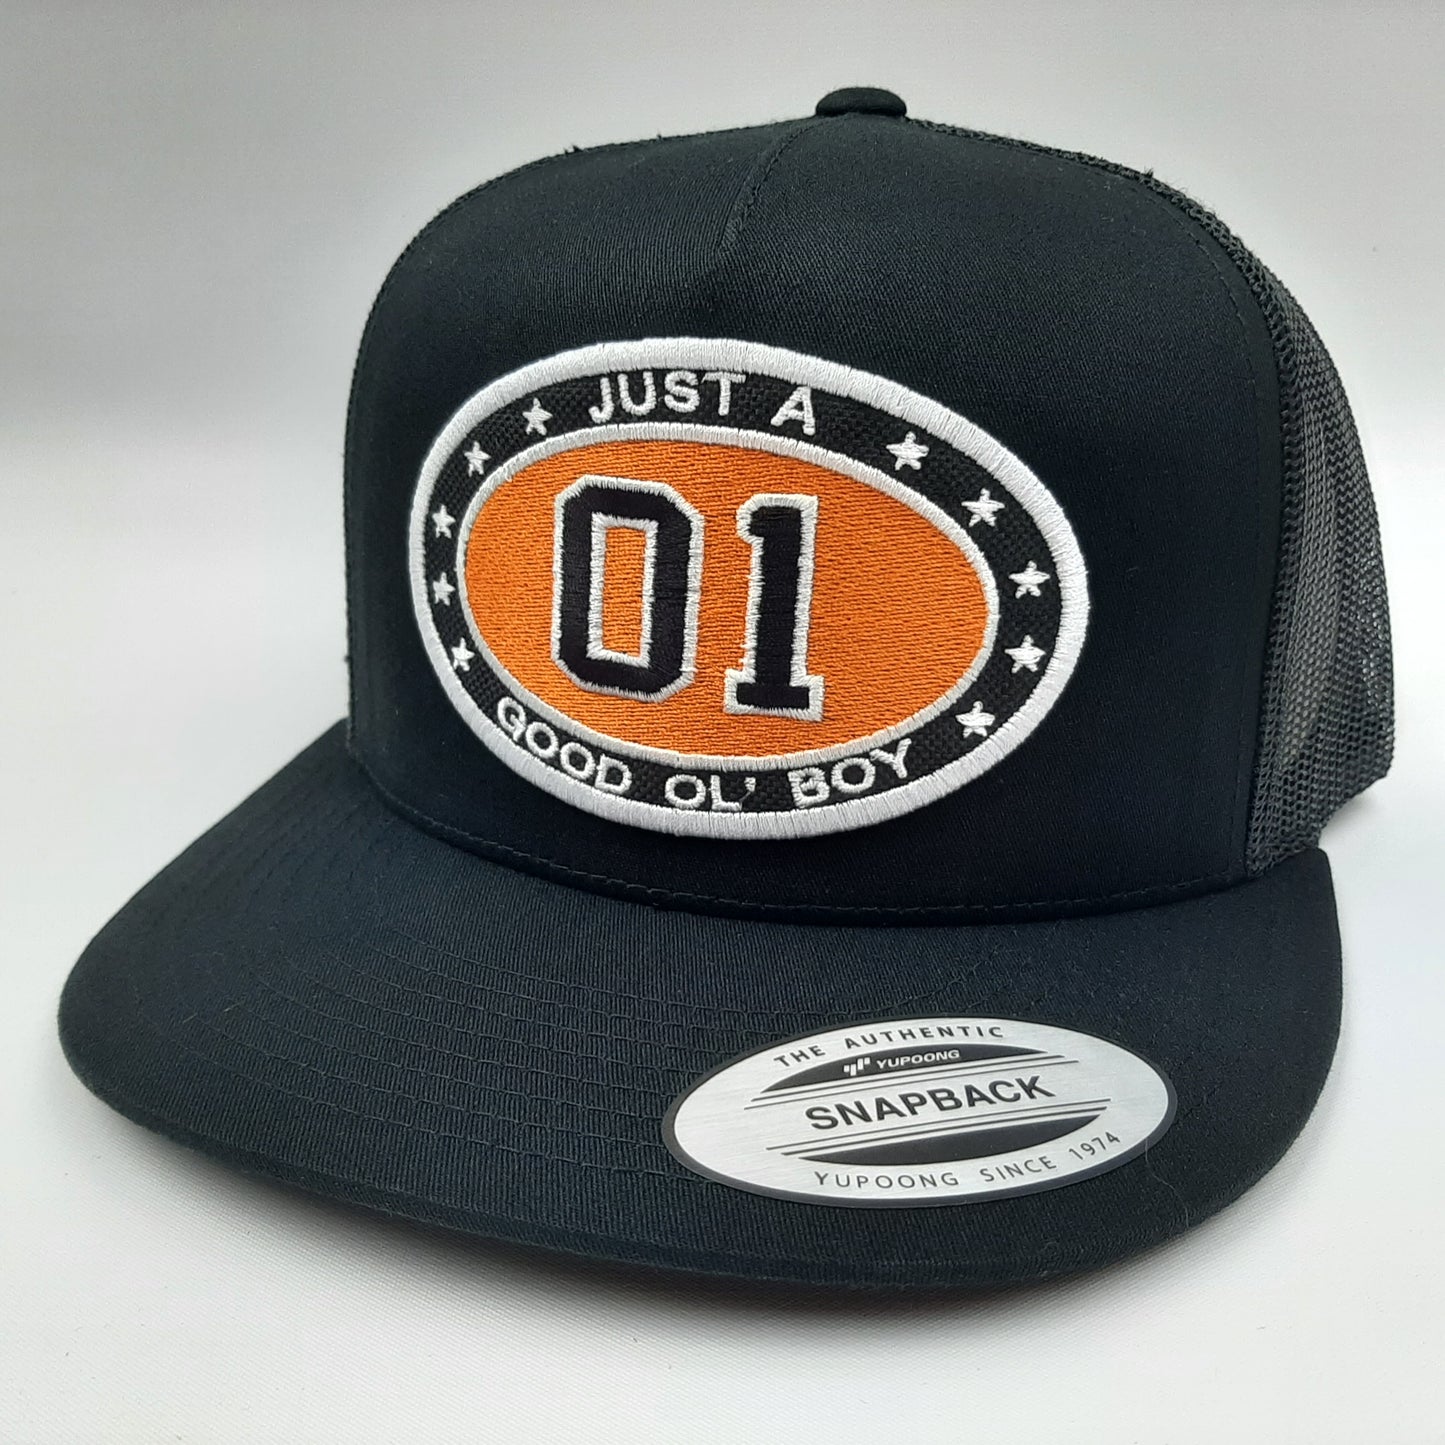 Dukes of Hazzard Gerneral Lee Embroidered patch flat bill mesh snapback cap hat black